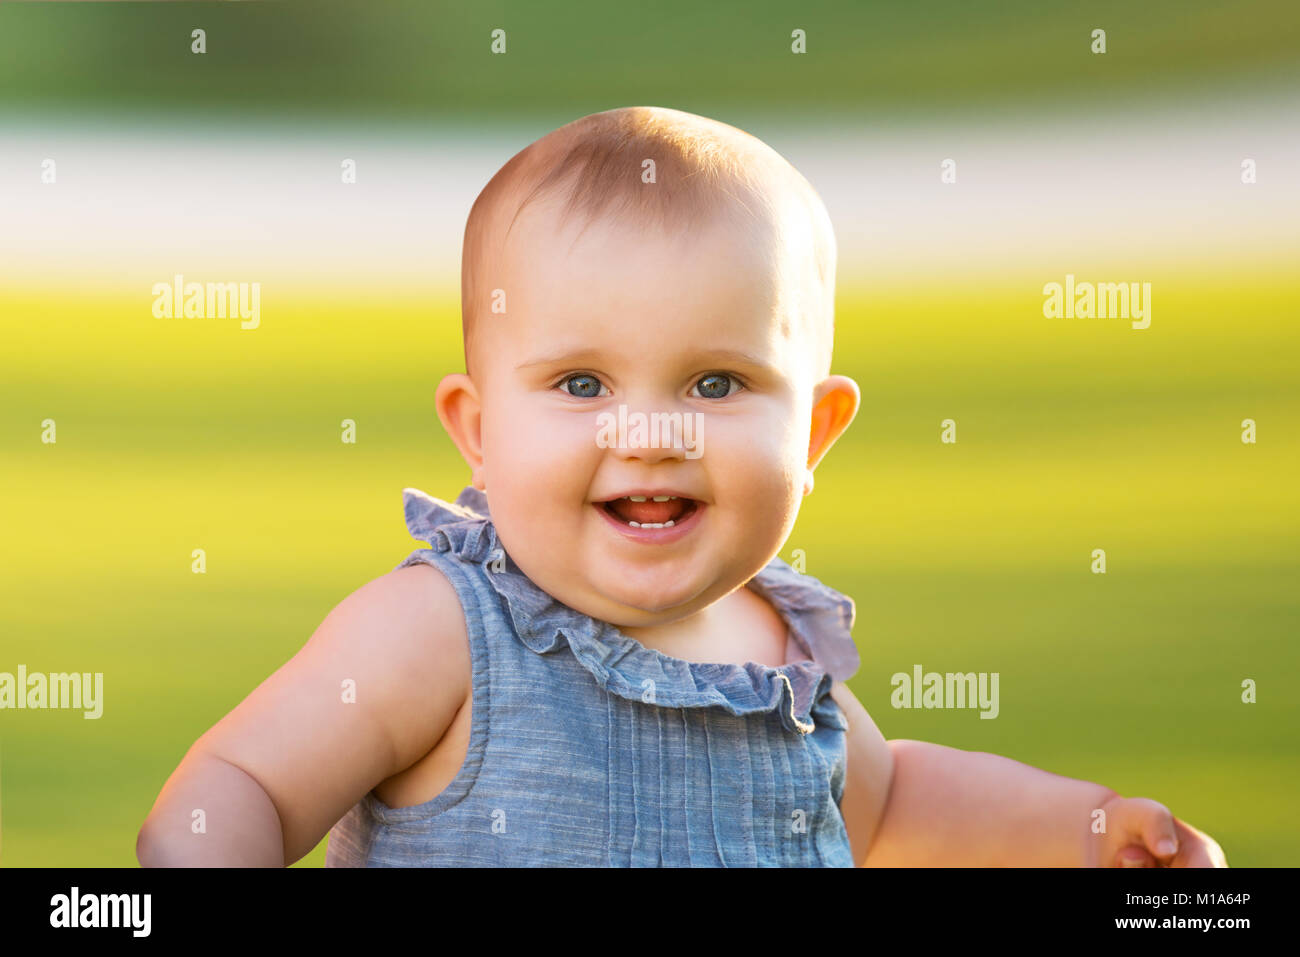 Portrait Of A Smiling Cute Infant Baby Girl Stock Photo